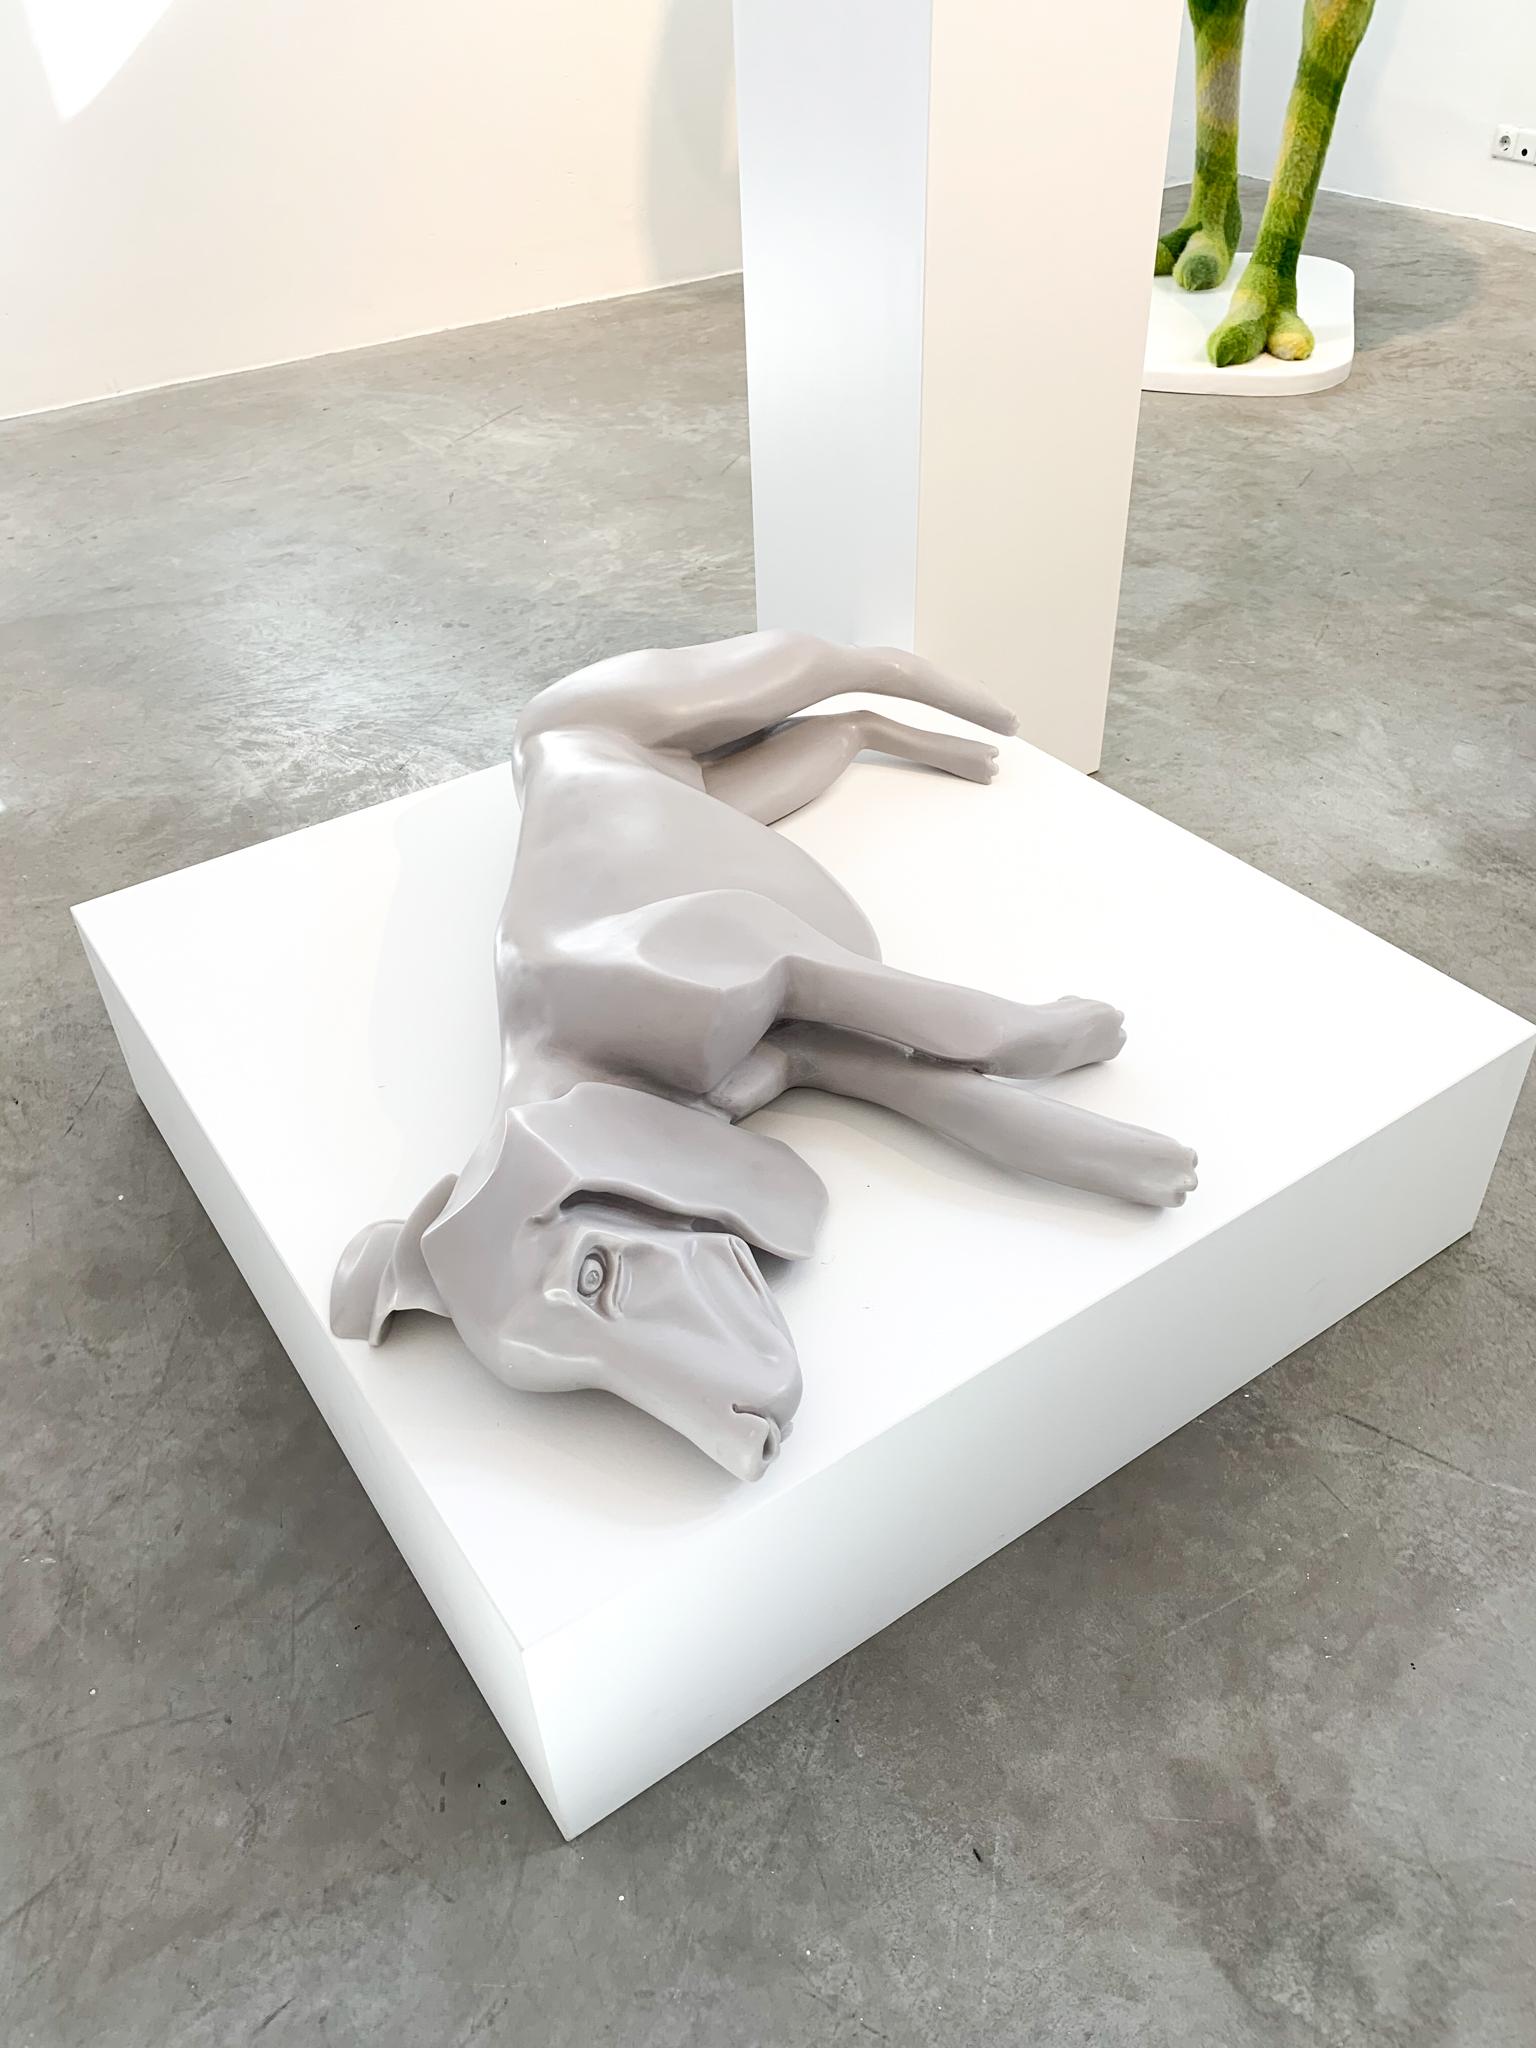 Sleeping dog by Servaas Roelandse in Neolith (Marble with polyester mixture)
Edition of 4. Servaas Roelandse is a Dutch Artist.